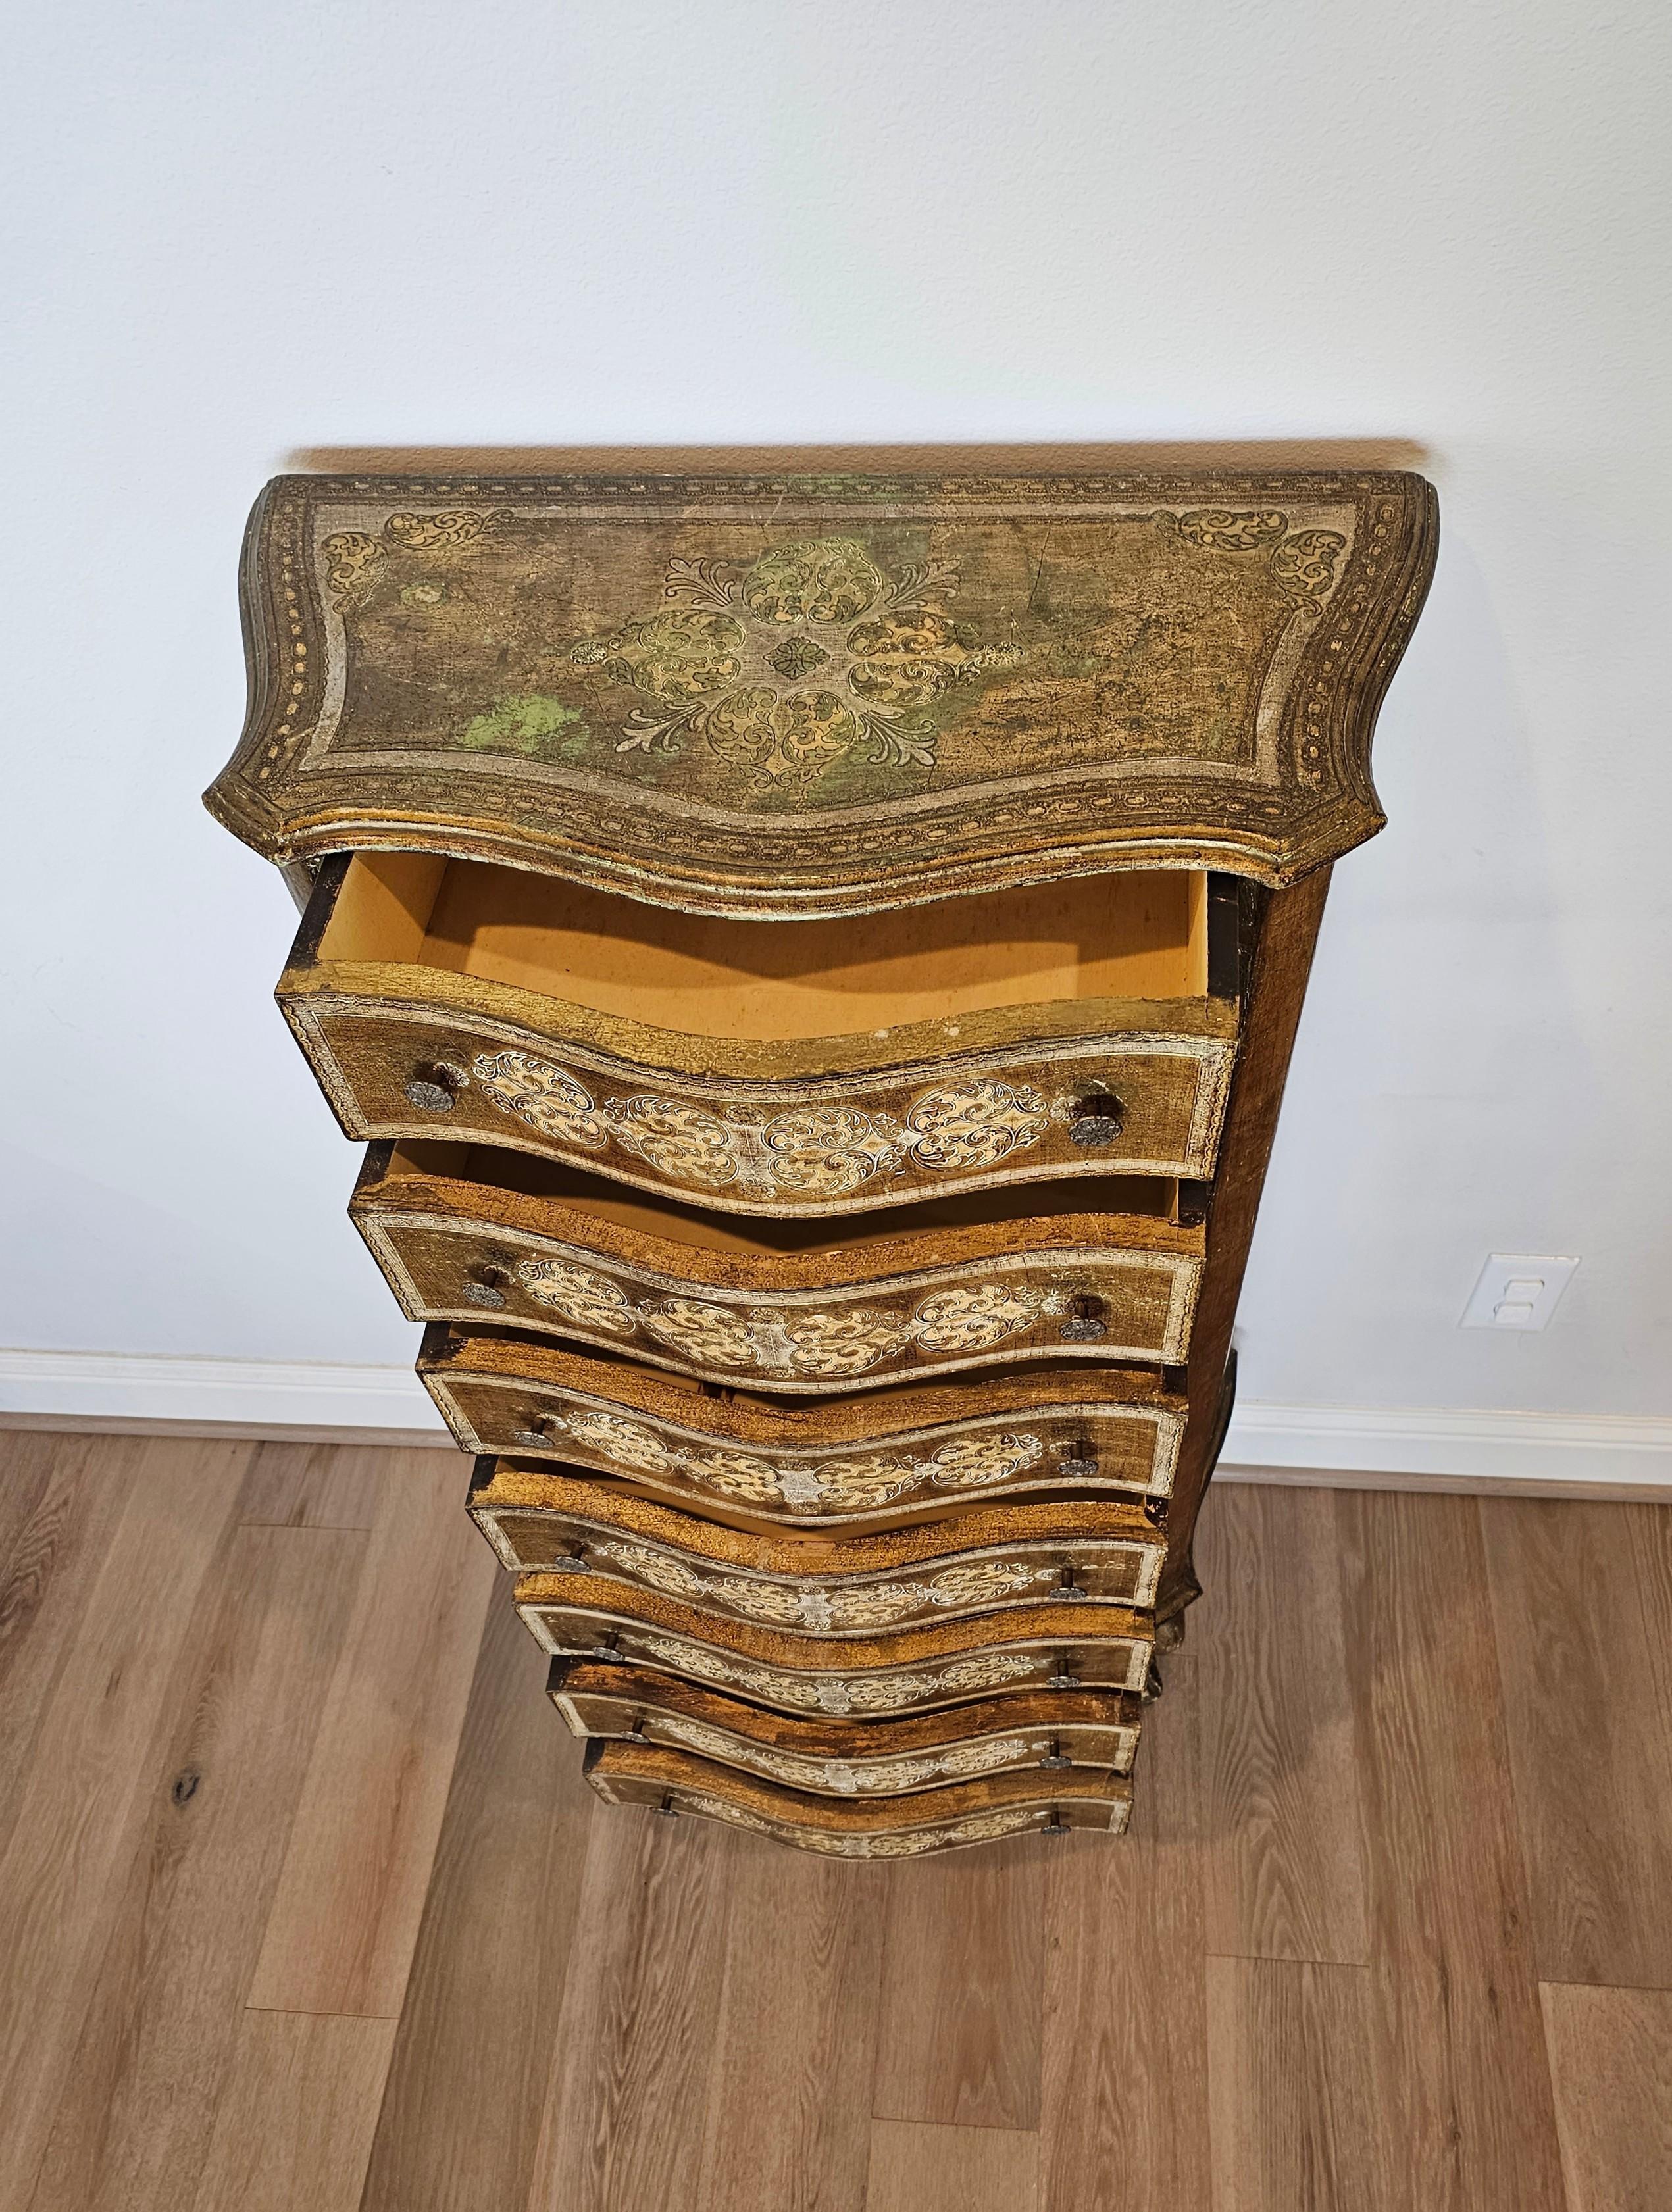 Vintage Italian Florentine Gilt Tall Chest of Drawers Lingerie Semainier In Distressed Condition For Sale In Forney, TX